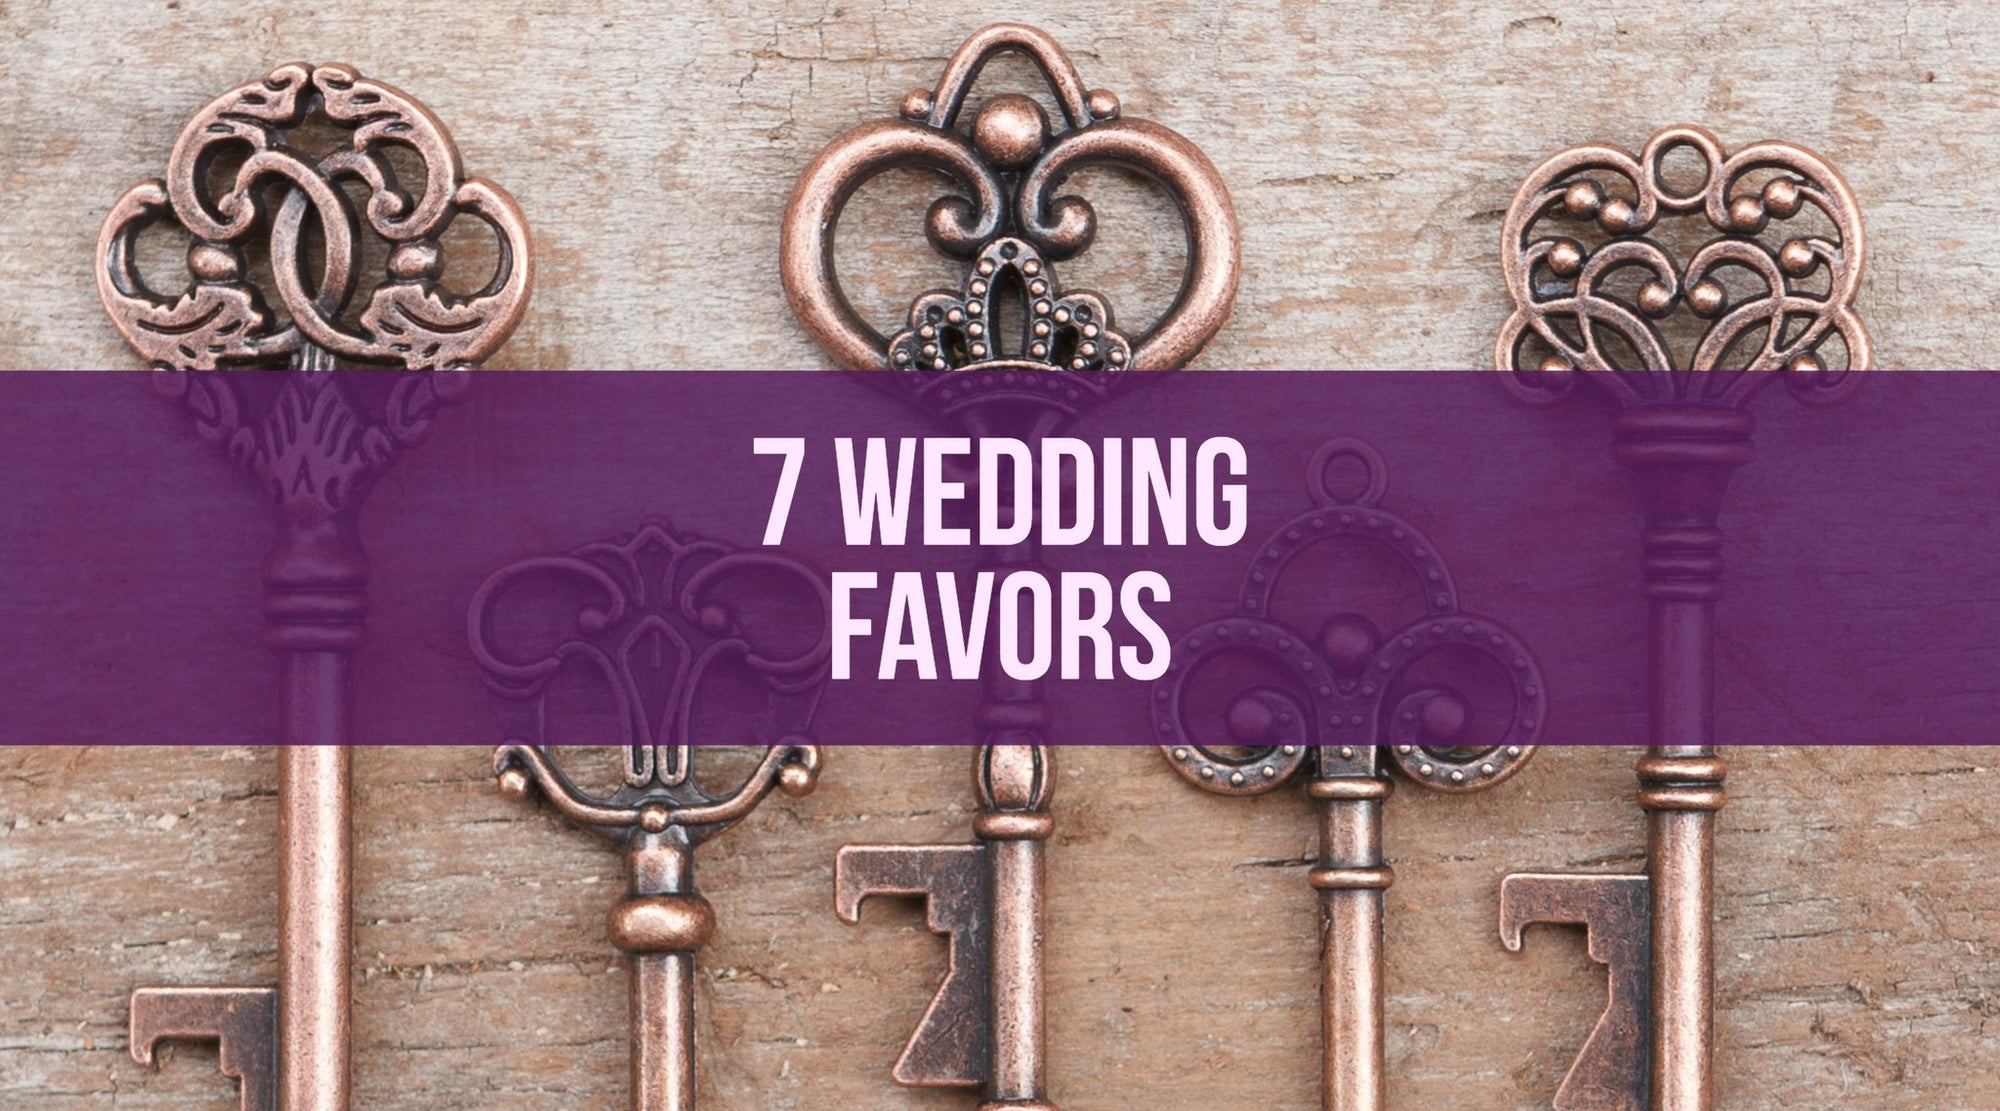 Seven Wedding Favors Guests Will Actually Want to Take Home